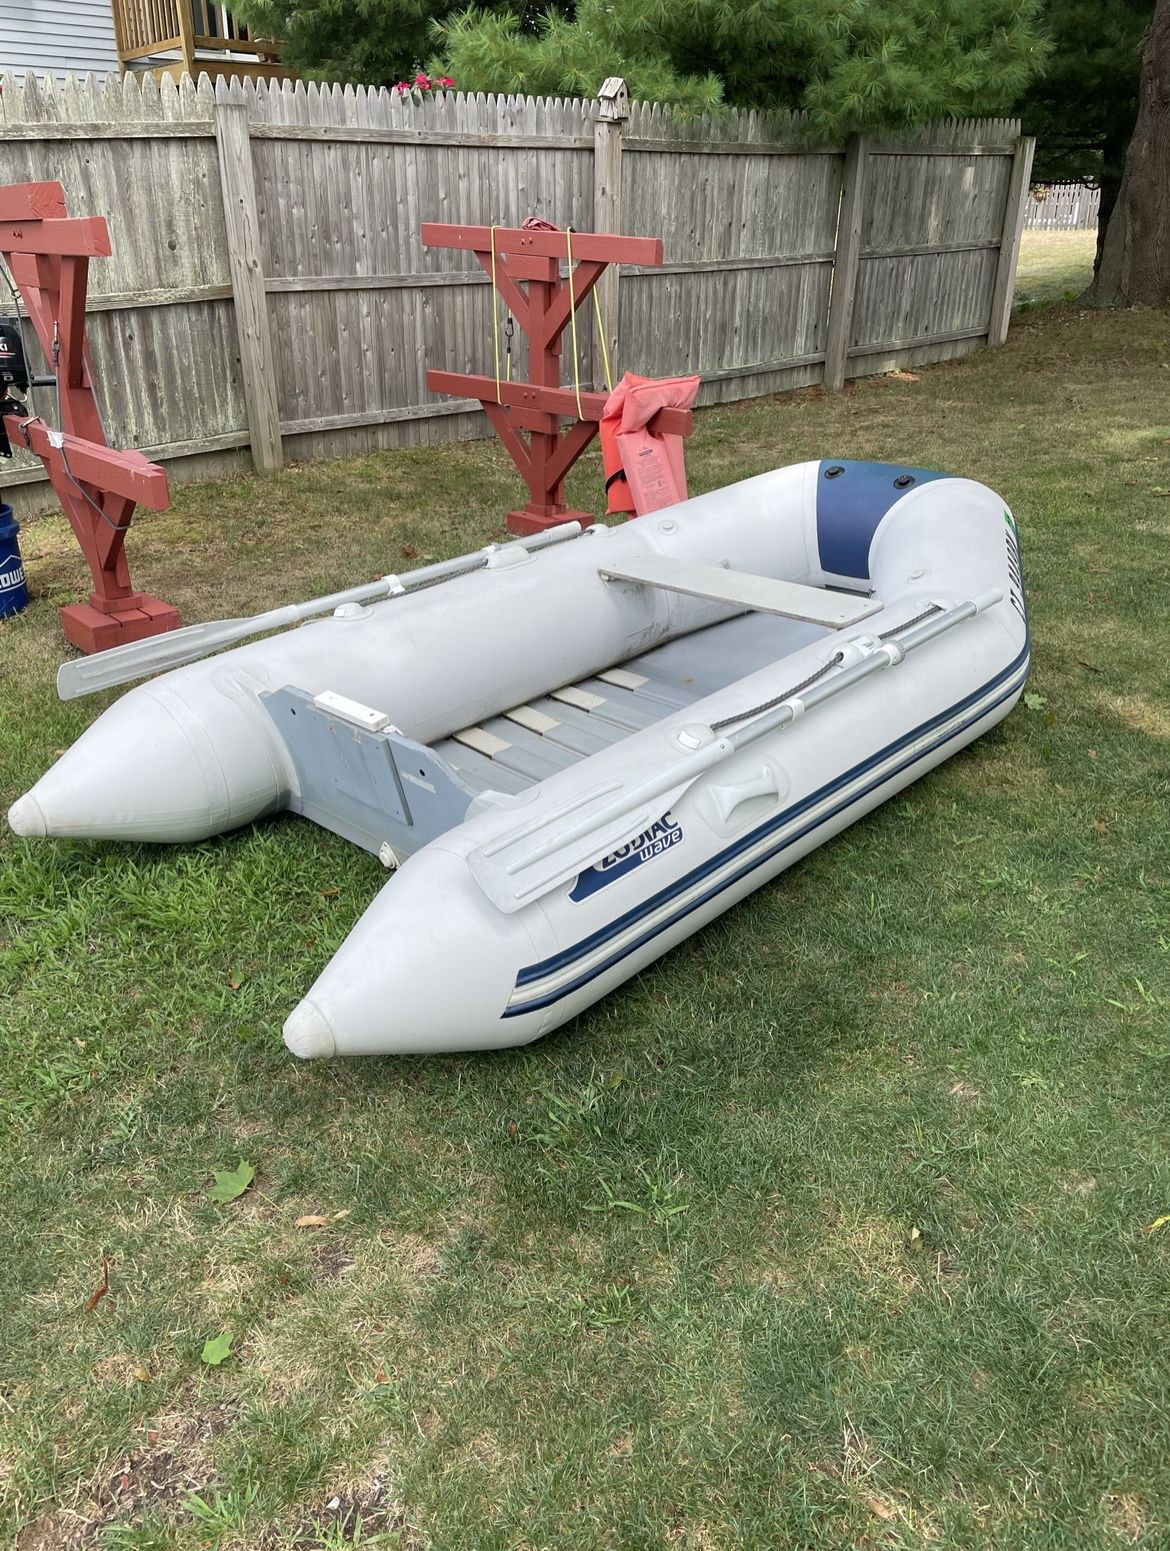 Zodiac Wave Dinghy Boat With Motor